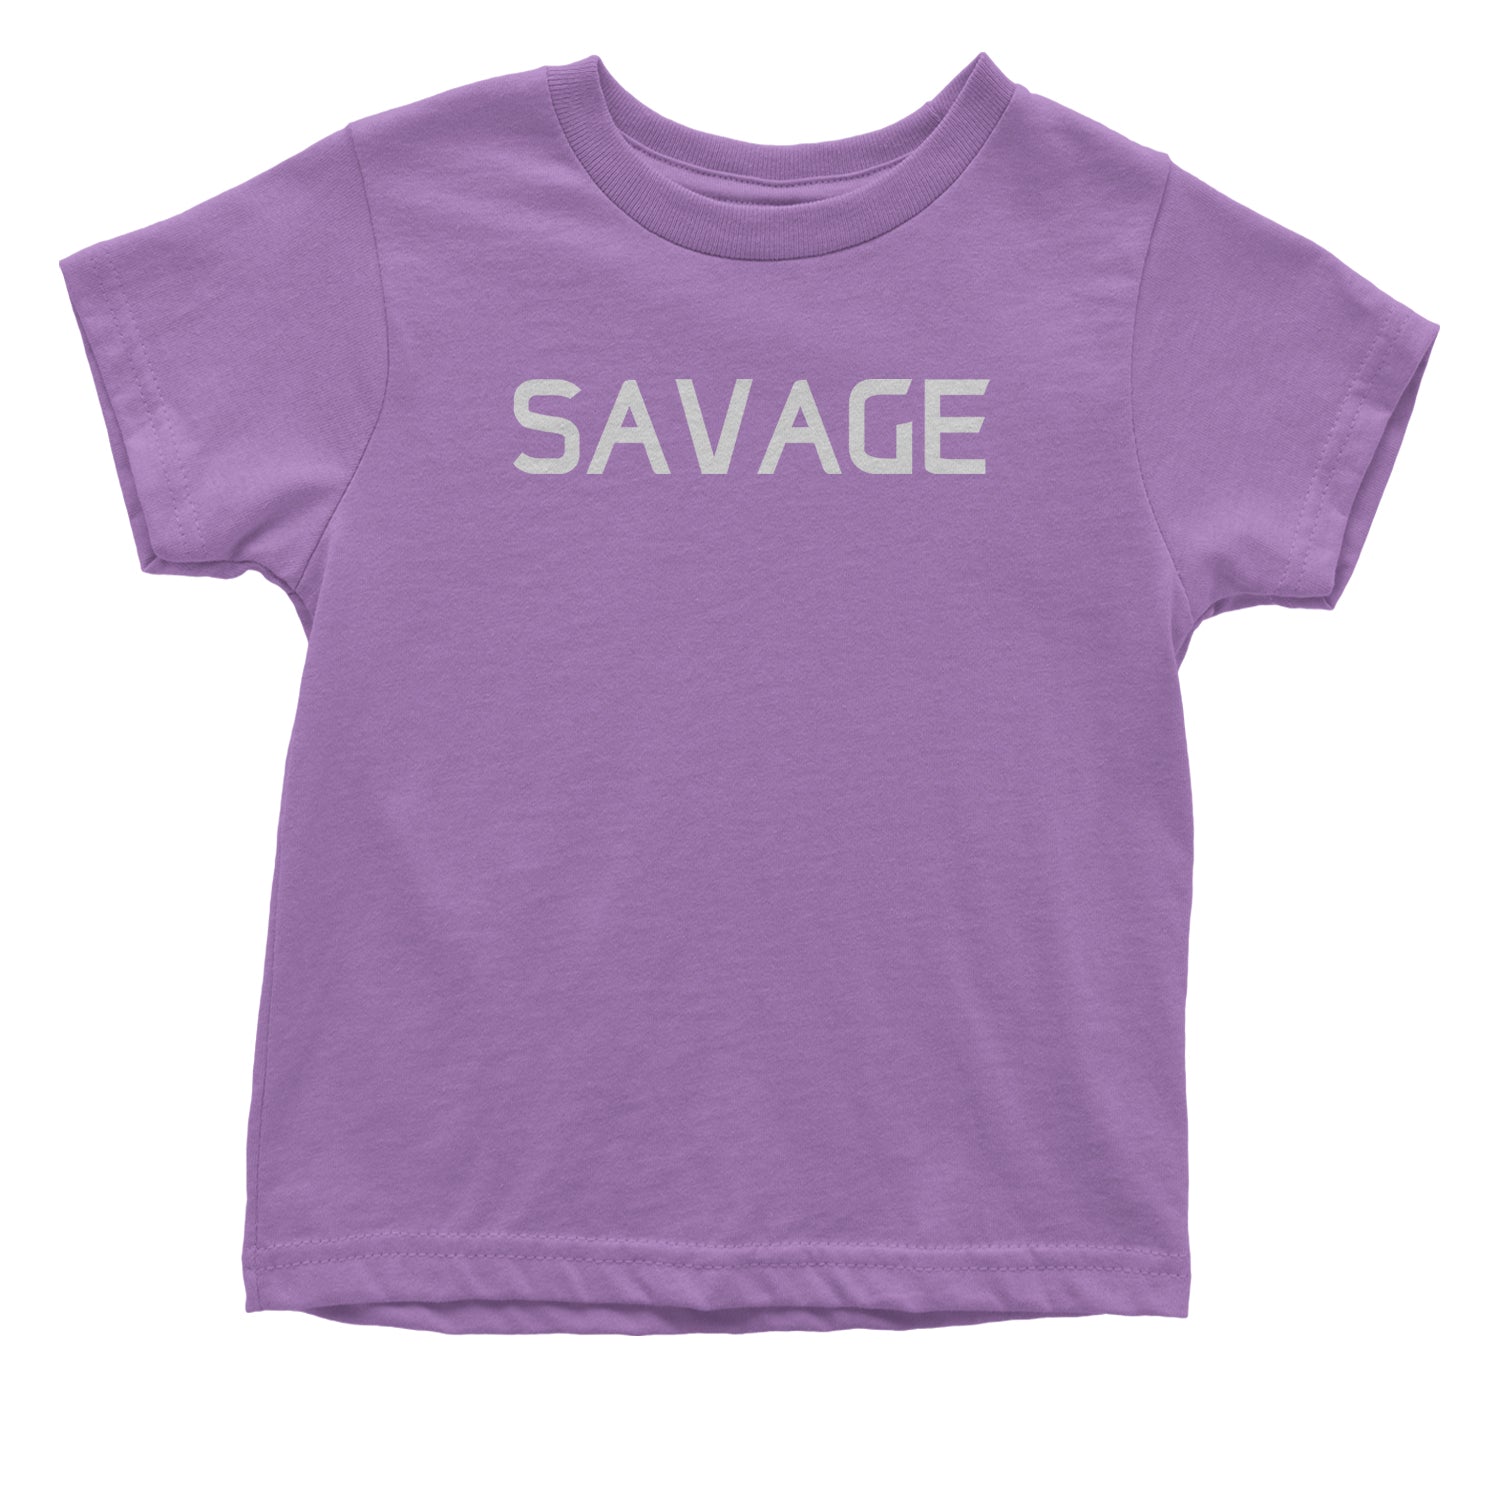 Savage Infant One-Piece Romper Bodysuit and Toddler T-shirt #expressiontees by Expression Tees